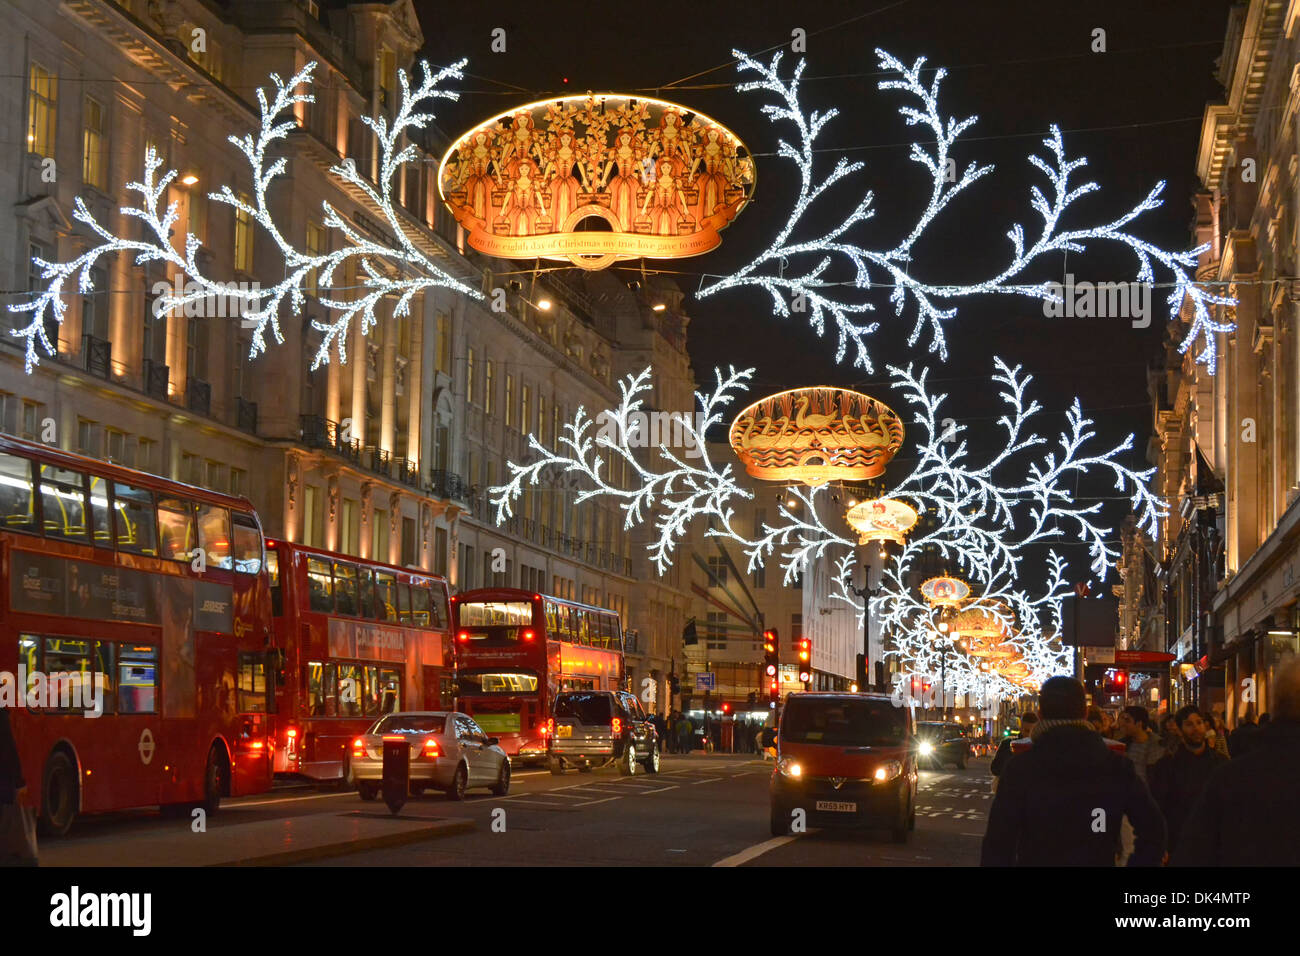 Night evening winter street scene and road traffic in Regent Street annual Christmas illuminations and decorations West End London England UK Stock Photo